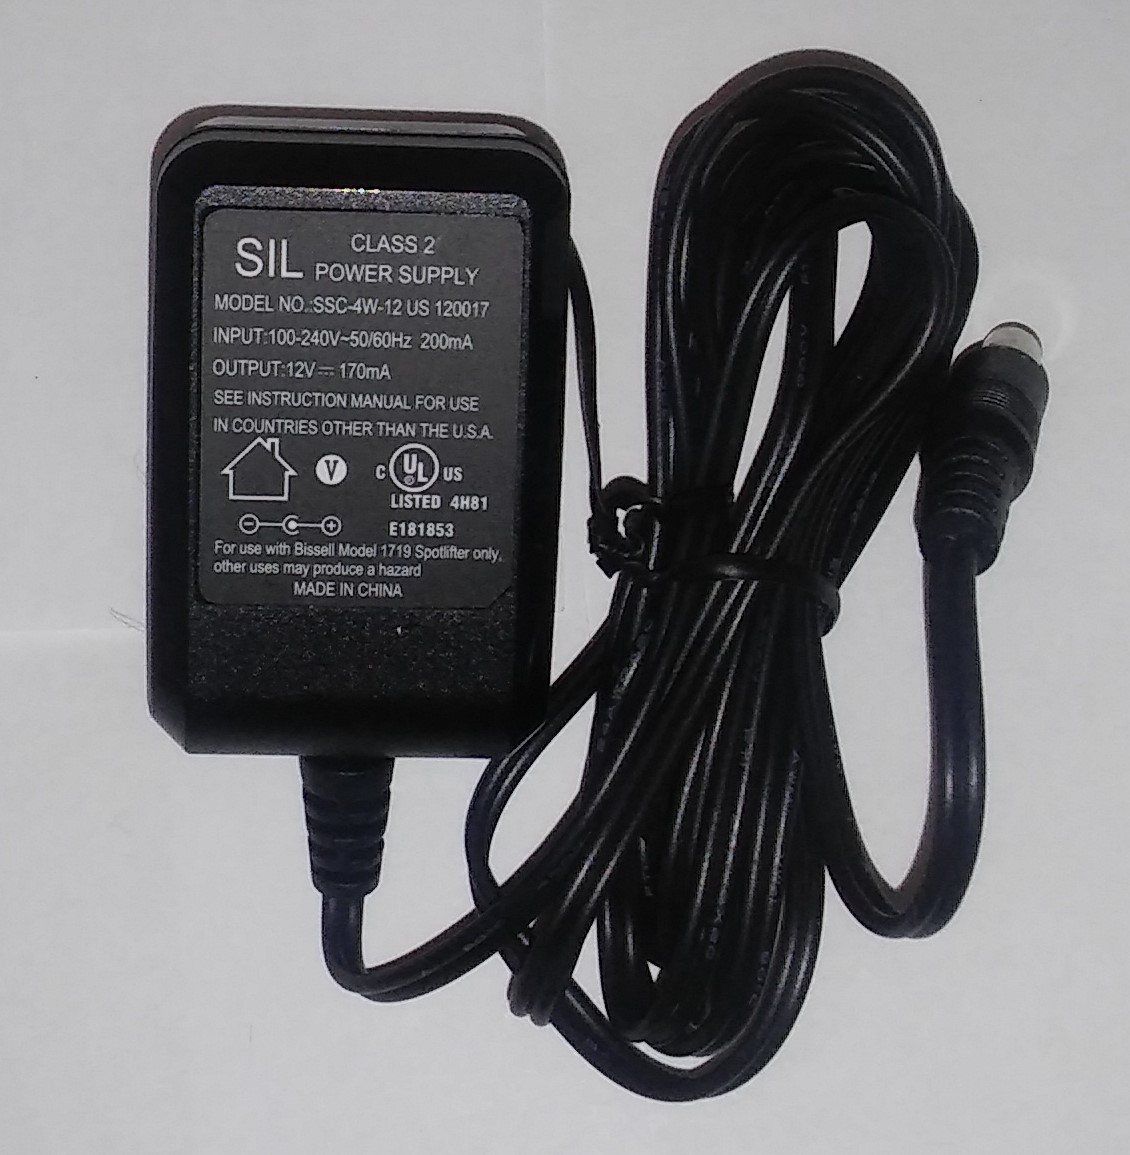 NEW 12V 170mA SIL SSC-4W-12 US 120017 AC Adapter For Classic Universal OBD II Scanner AD310